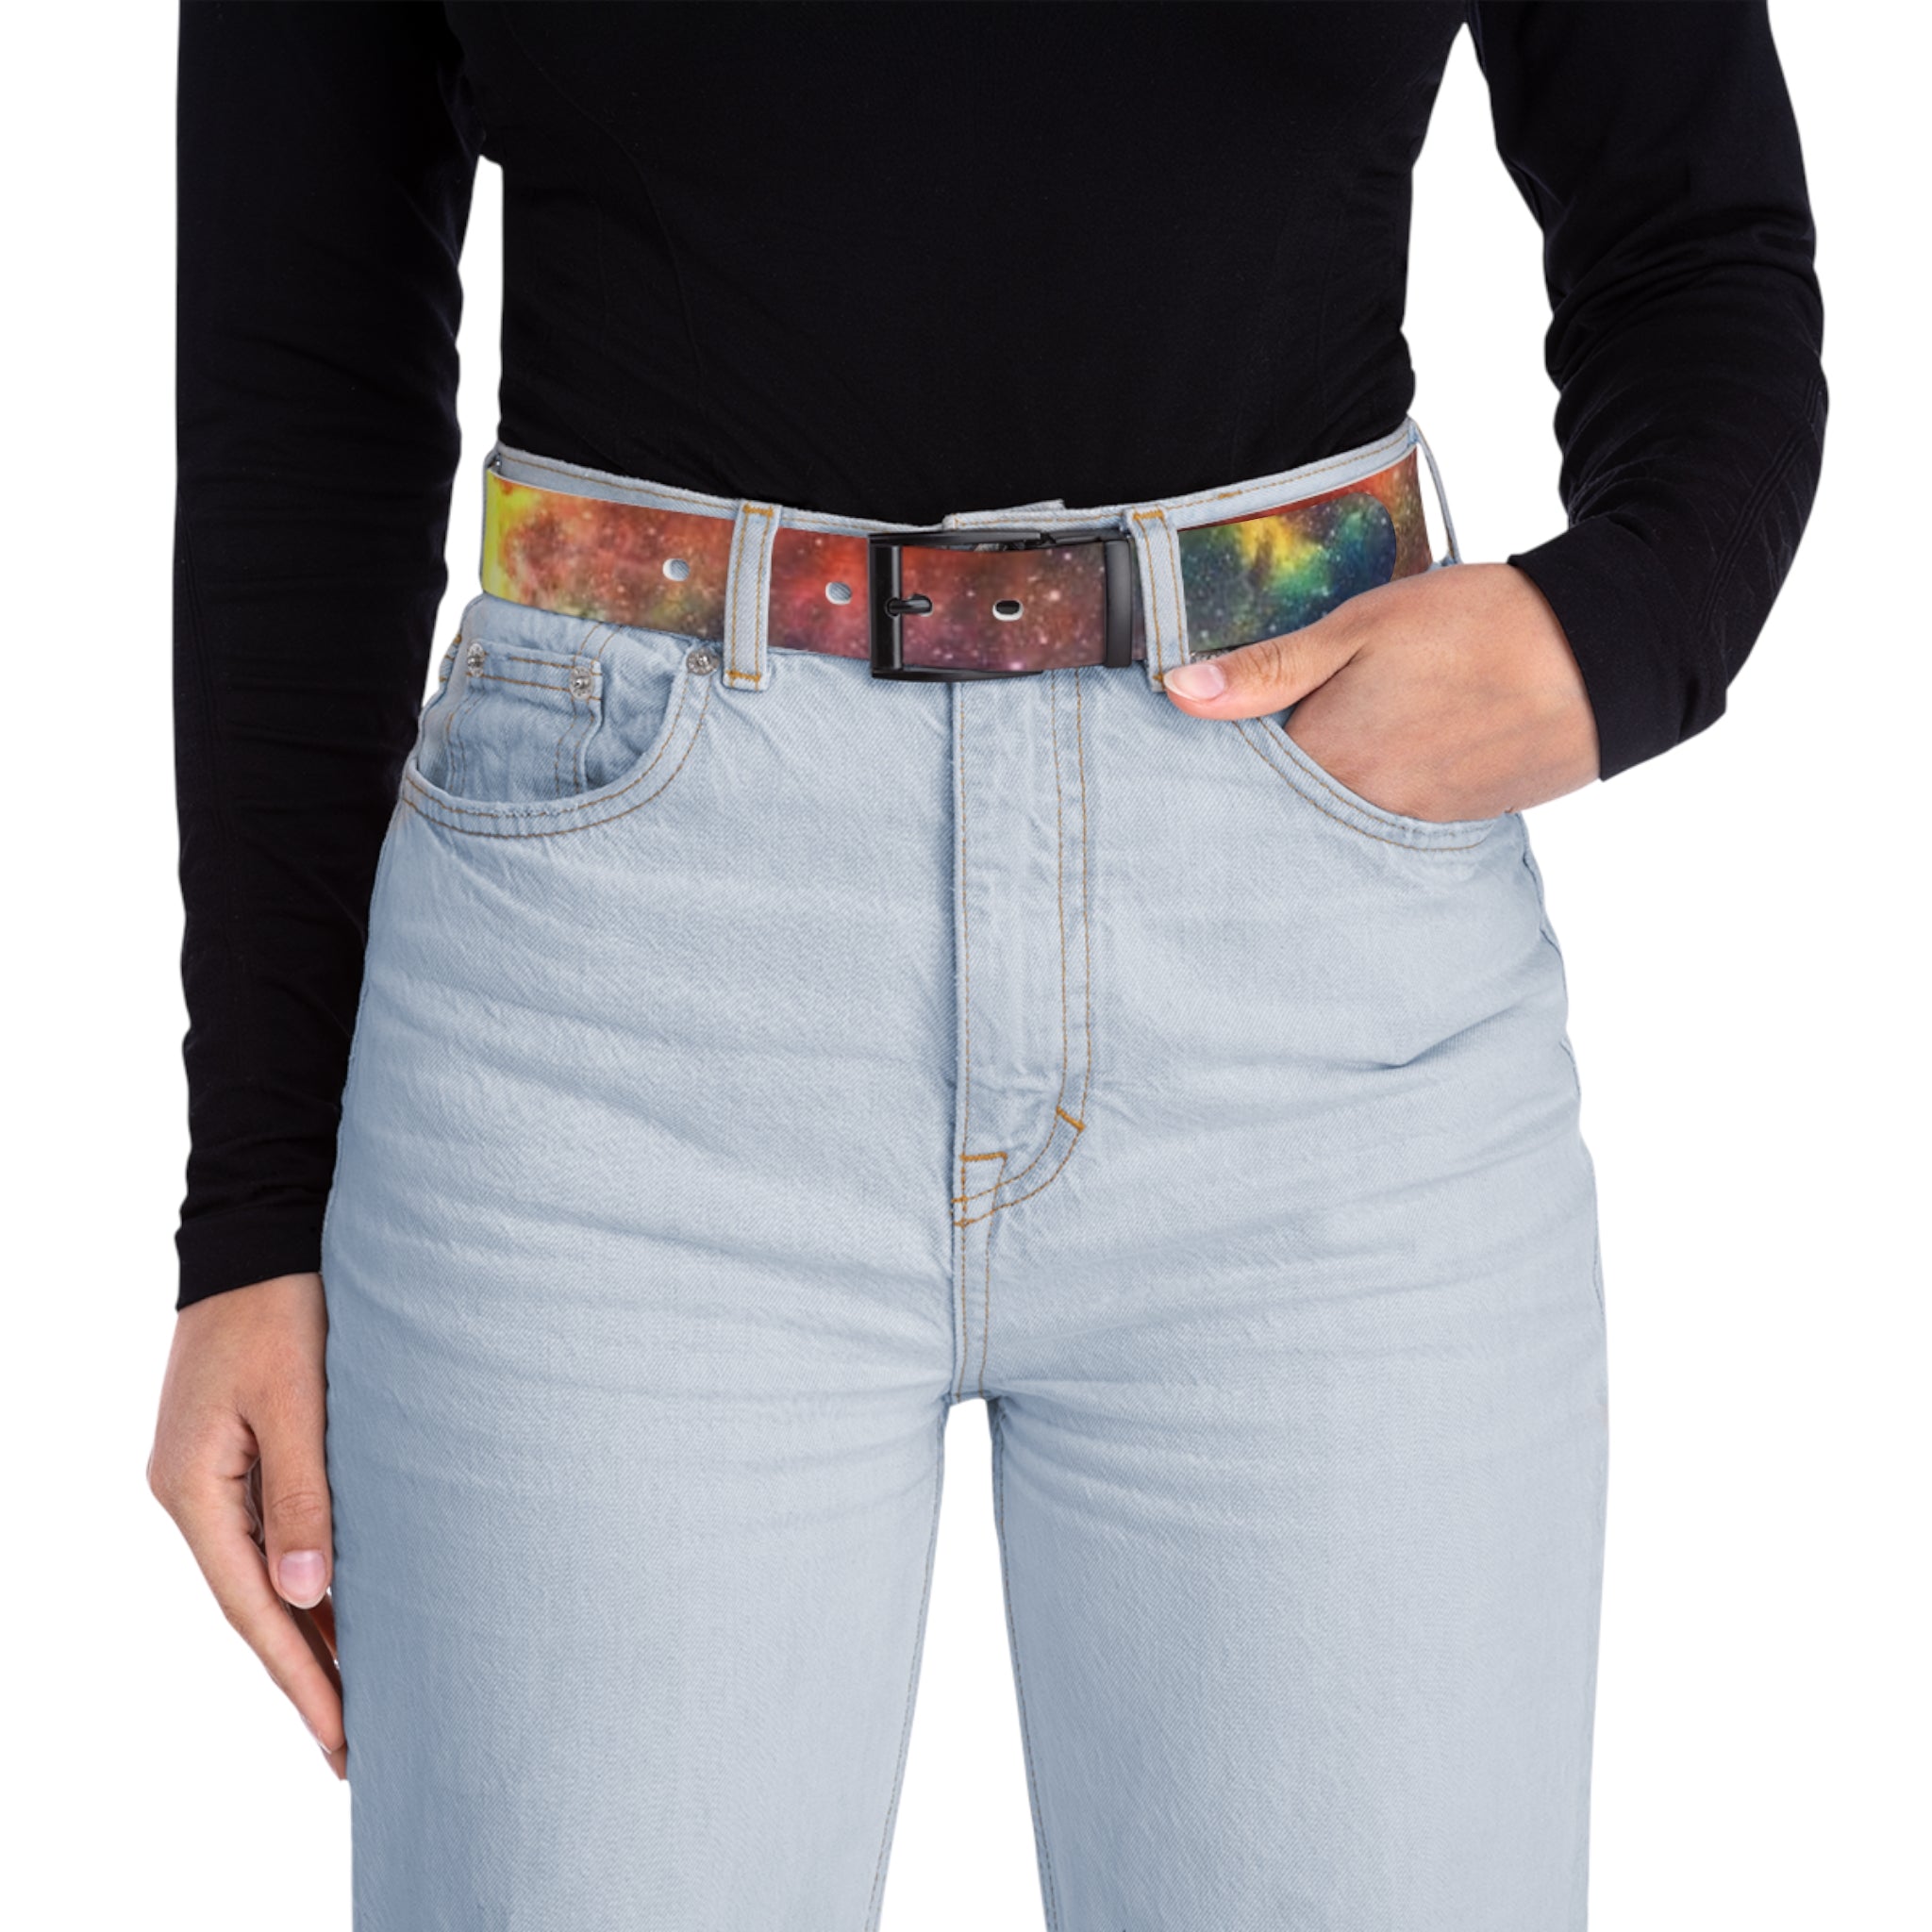 Colorful Cosmos Belt